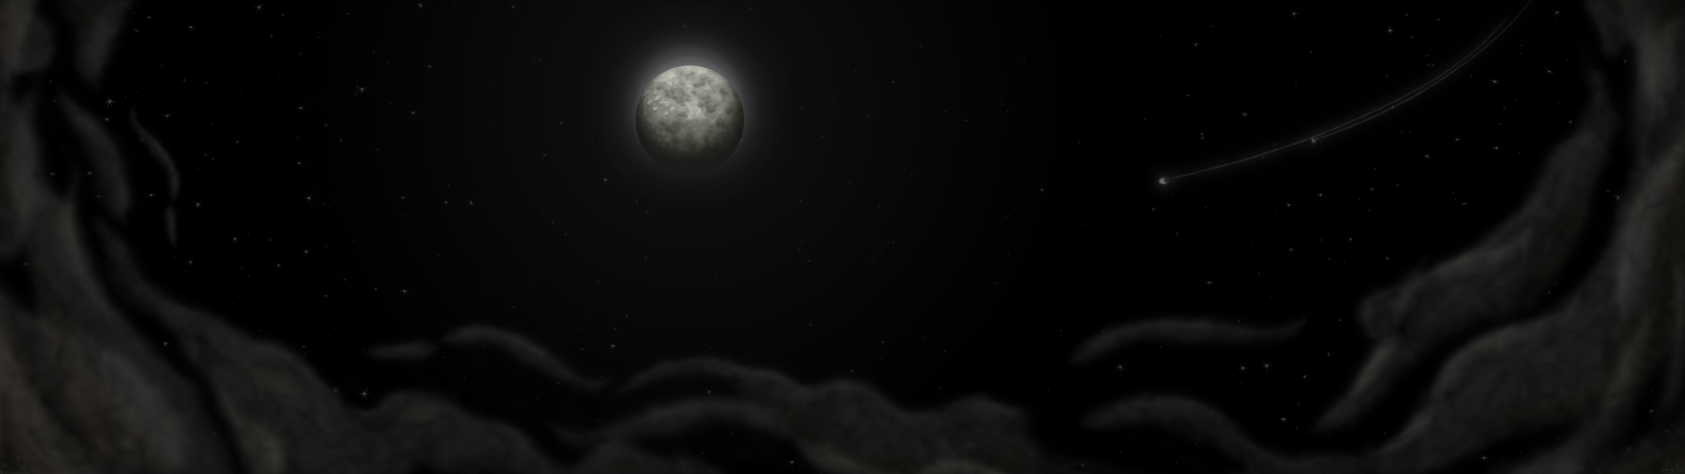 Moonlight Dual 4k And 1080p Wallpaper By Ikzink On